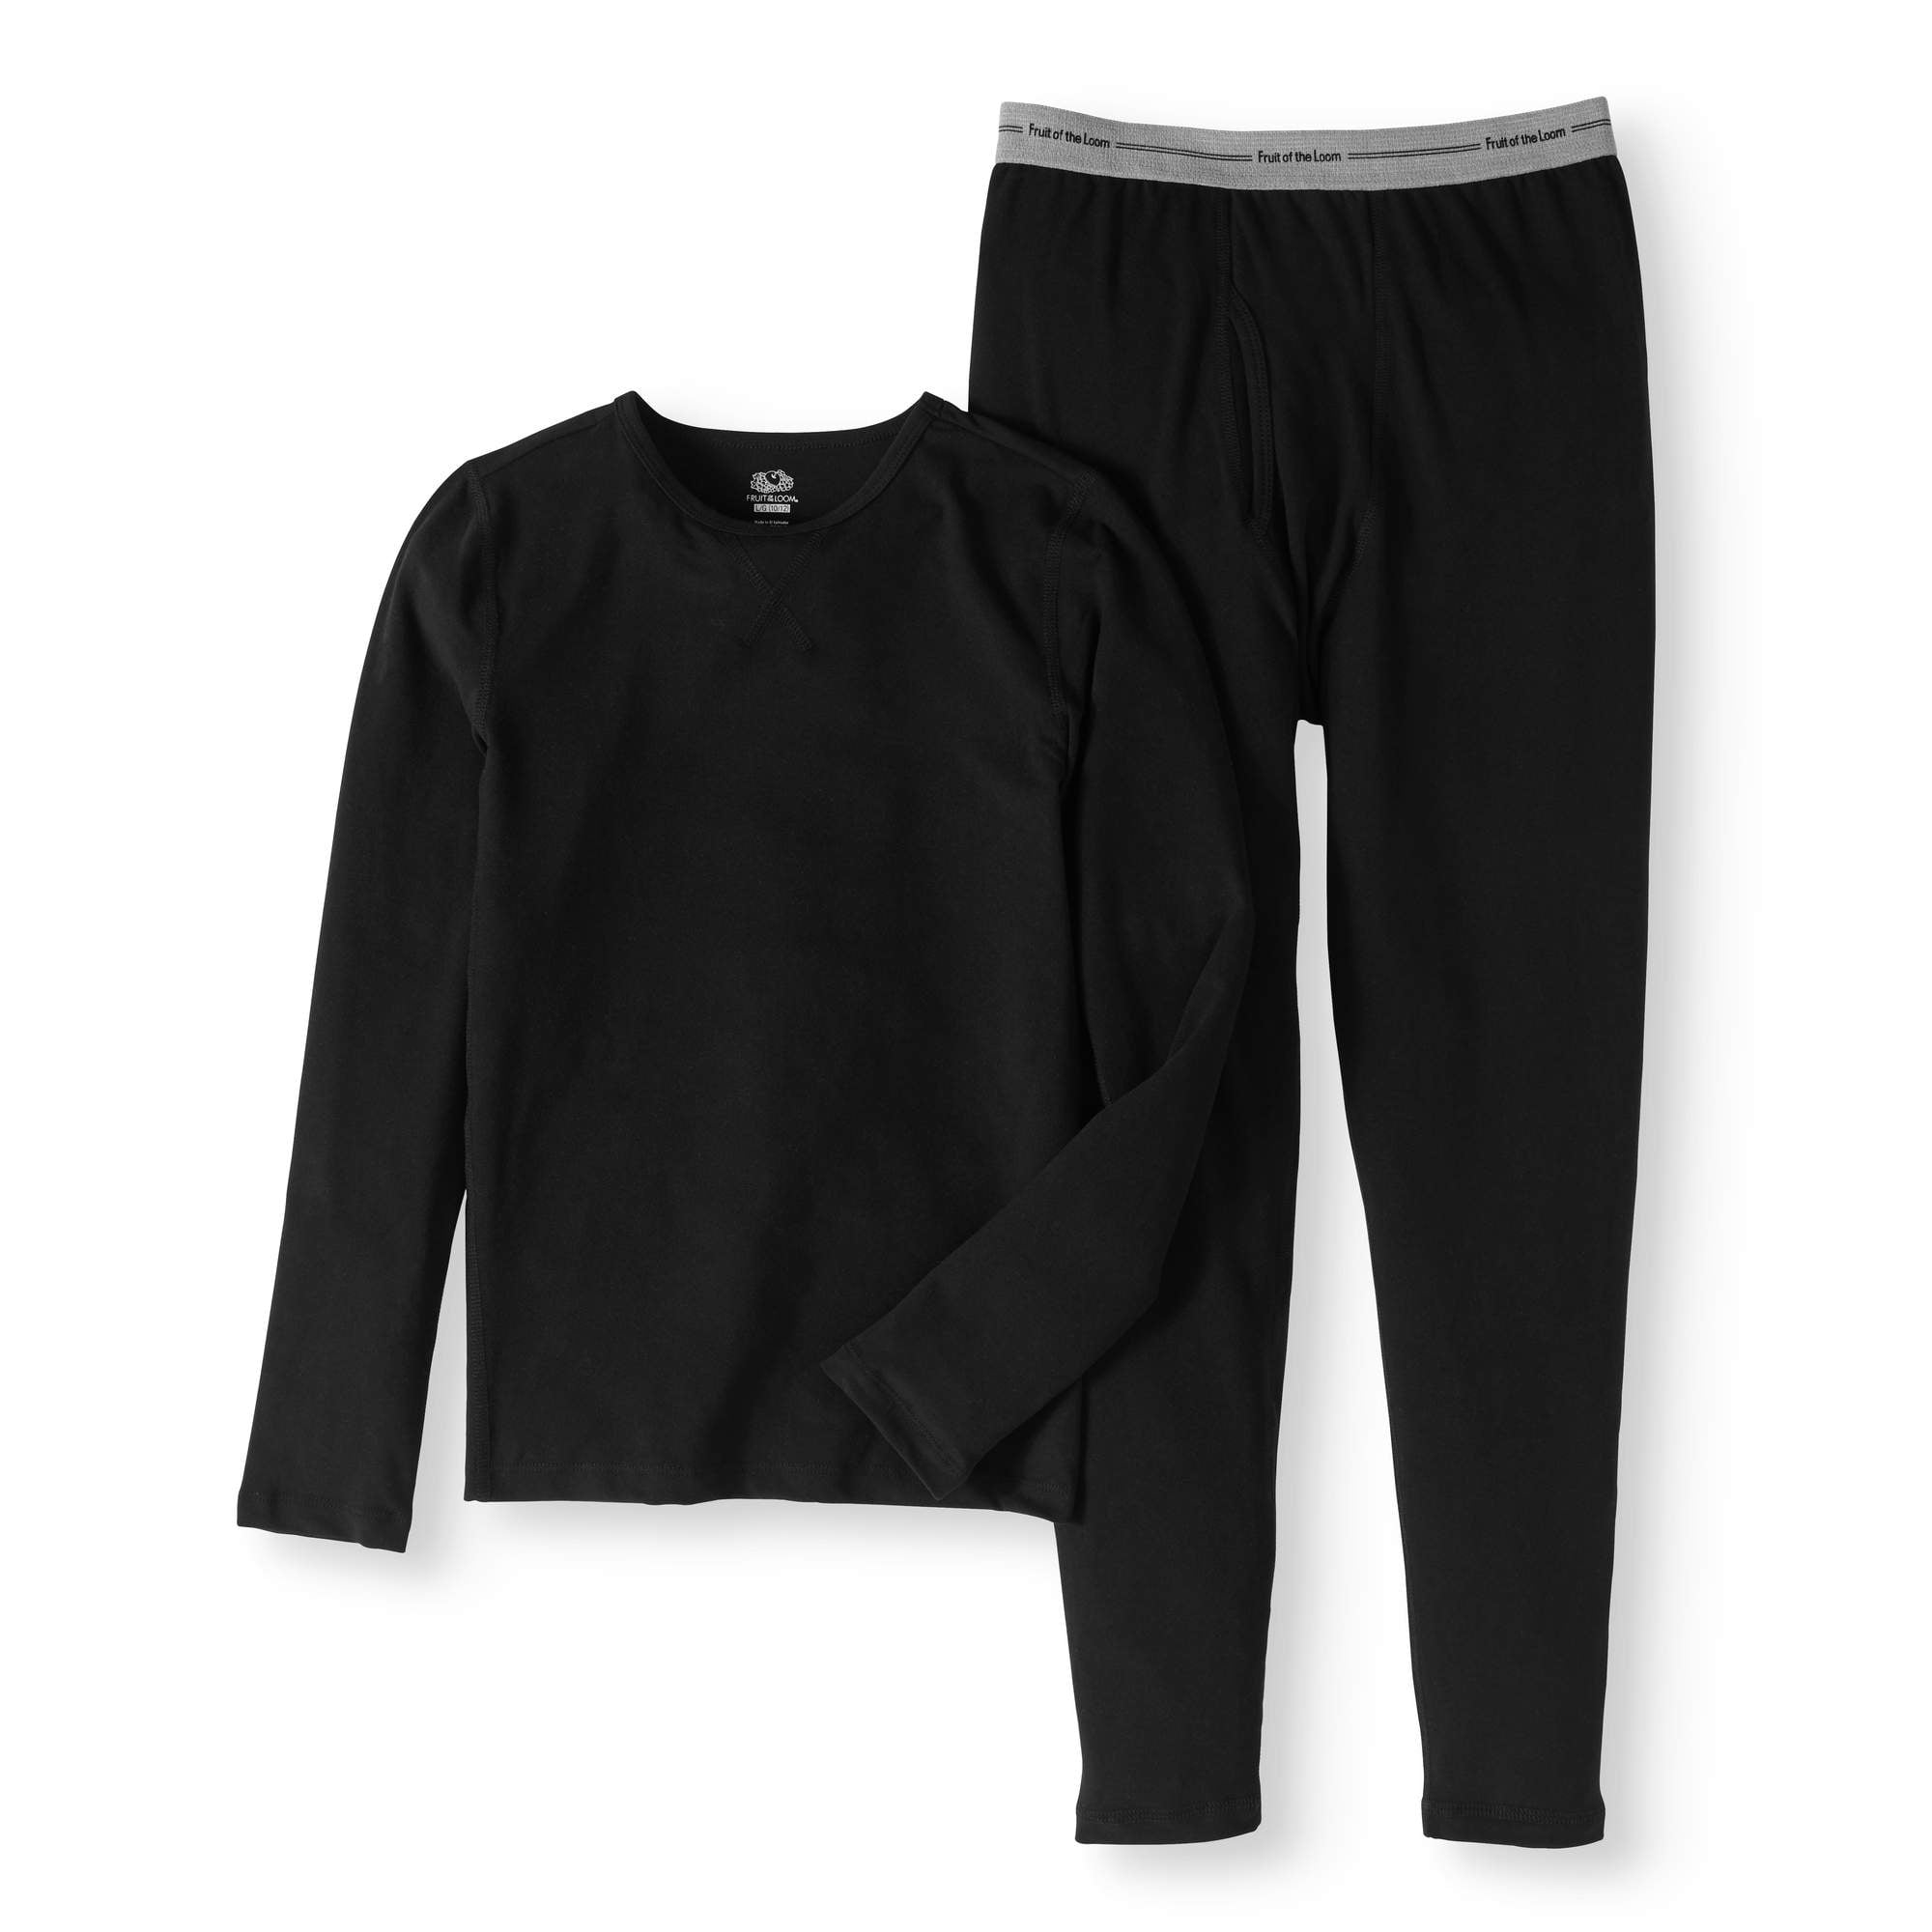 Fruit of the Loom Boys Active Performance Thermal Underwear Set